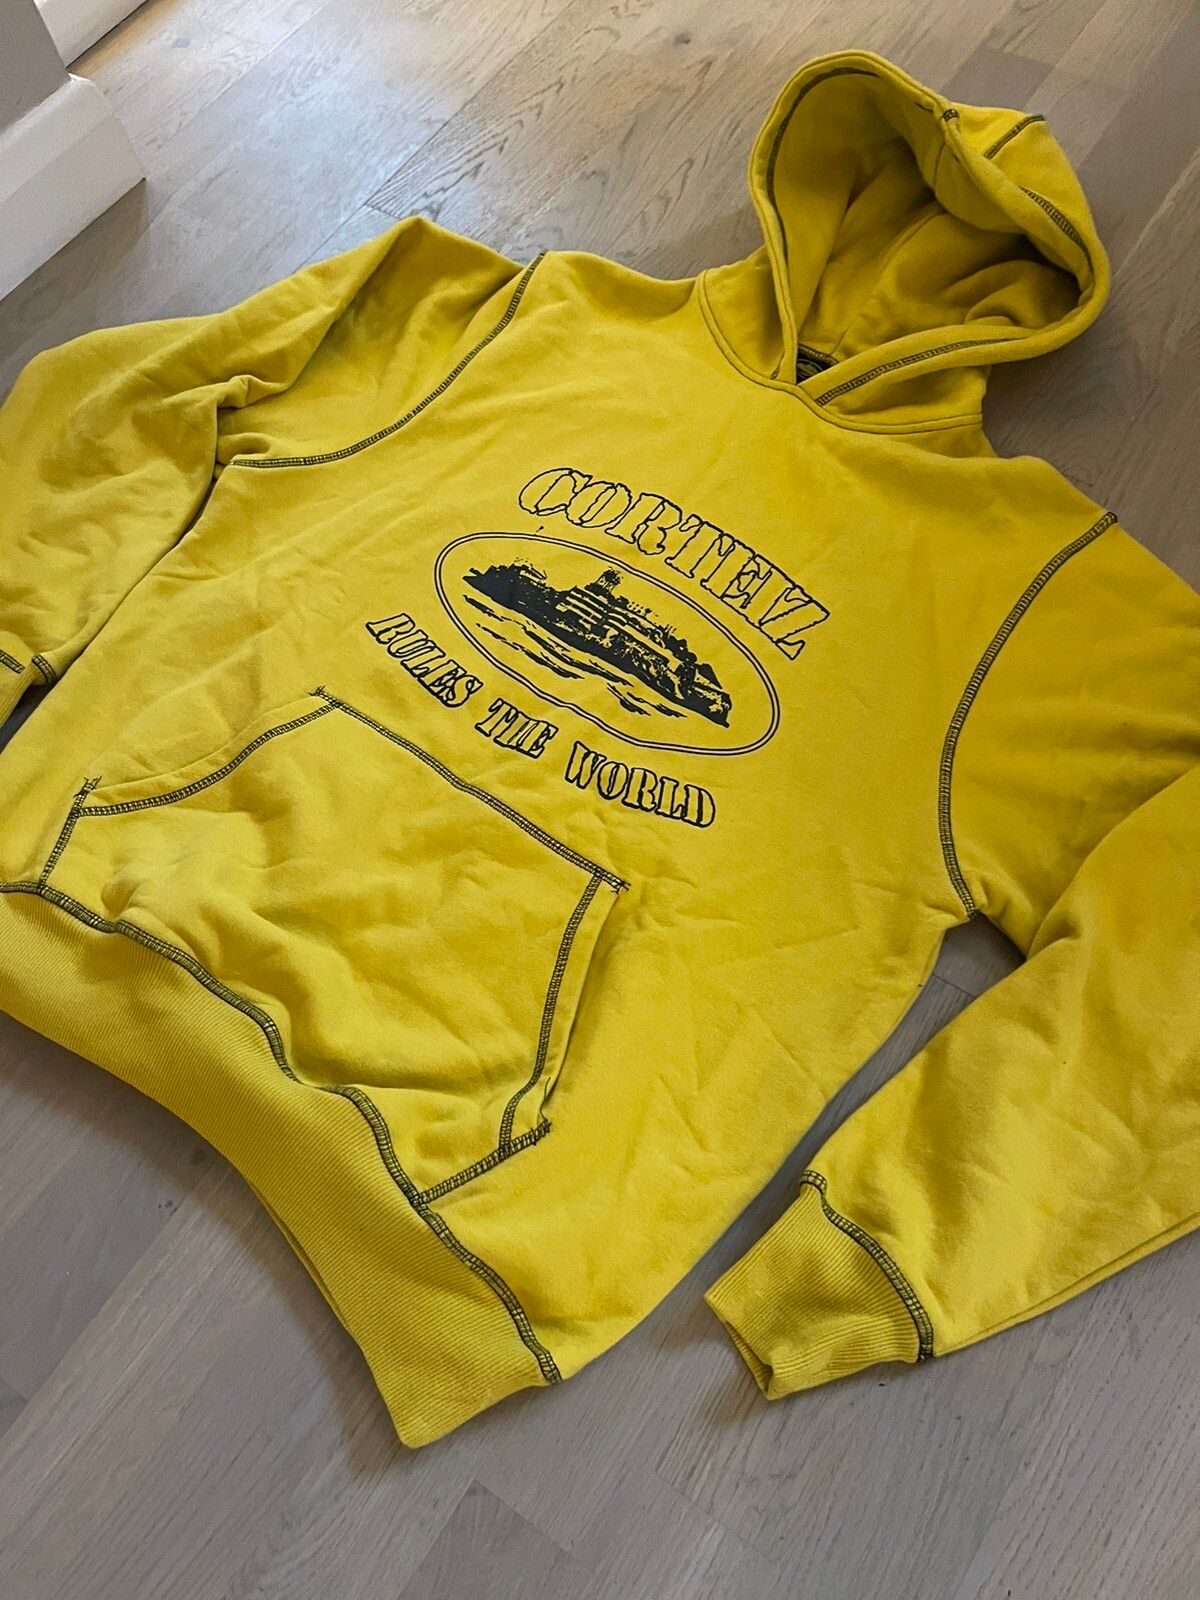 Corteiz CORTEIZ hoodie sizes shown in photos BY REAL TAPE MEASURE Size US M / EU 48-50 / 2 - 1 Preview